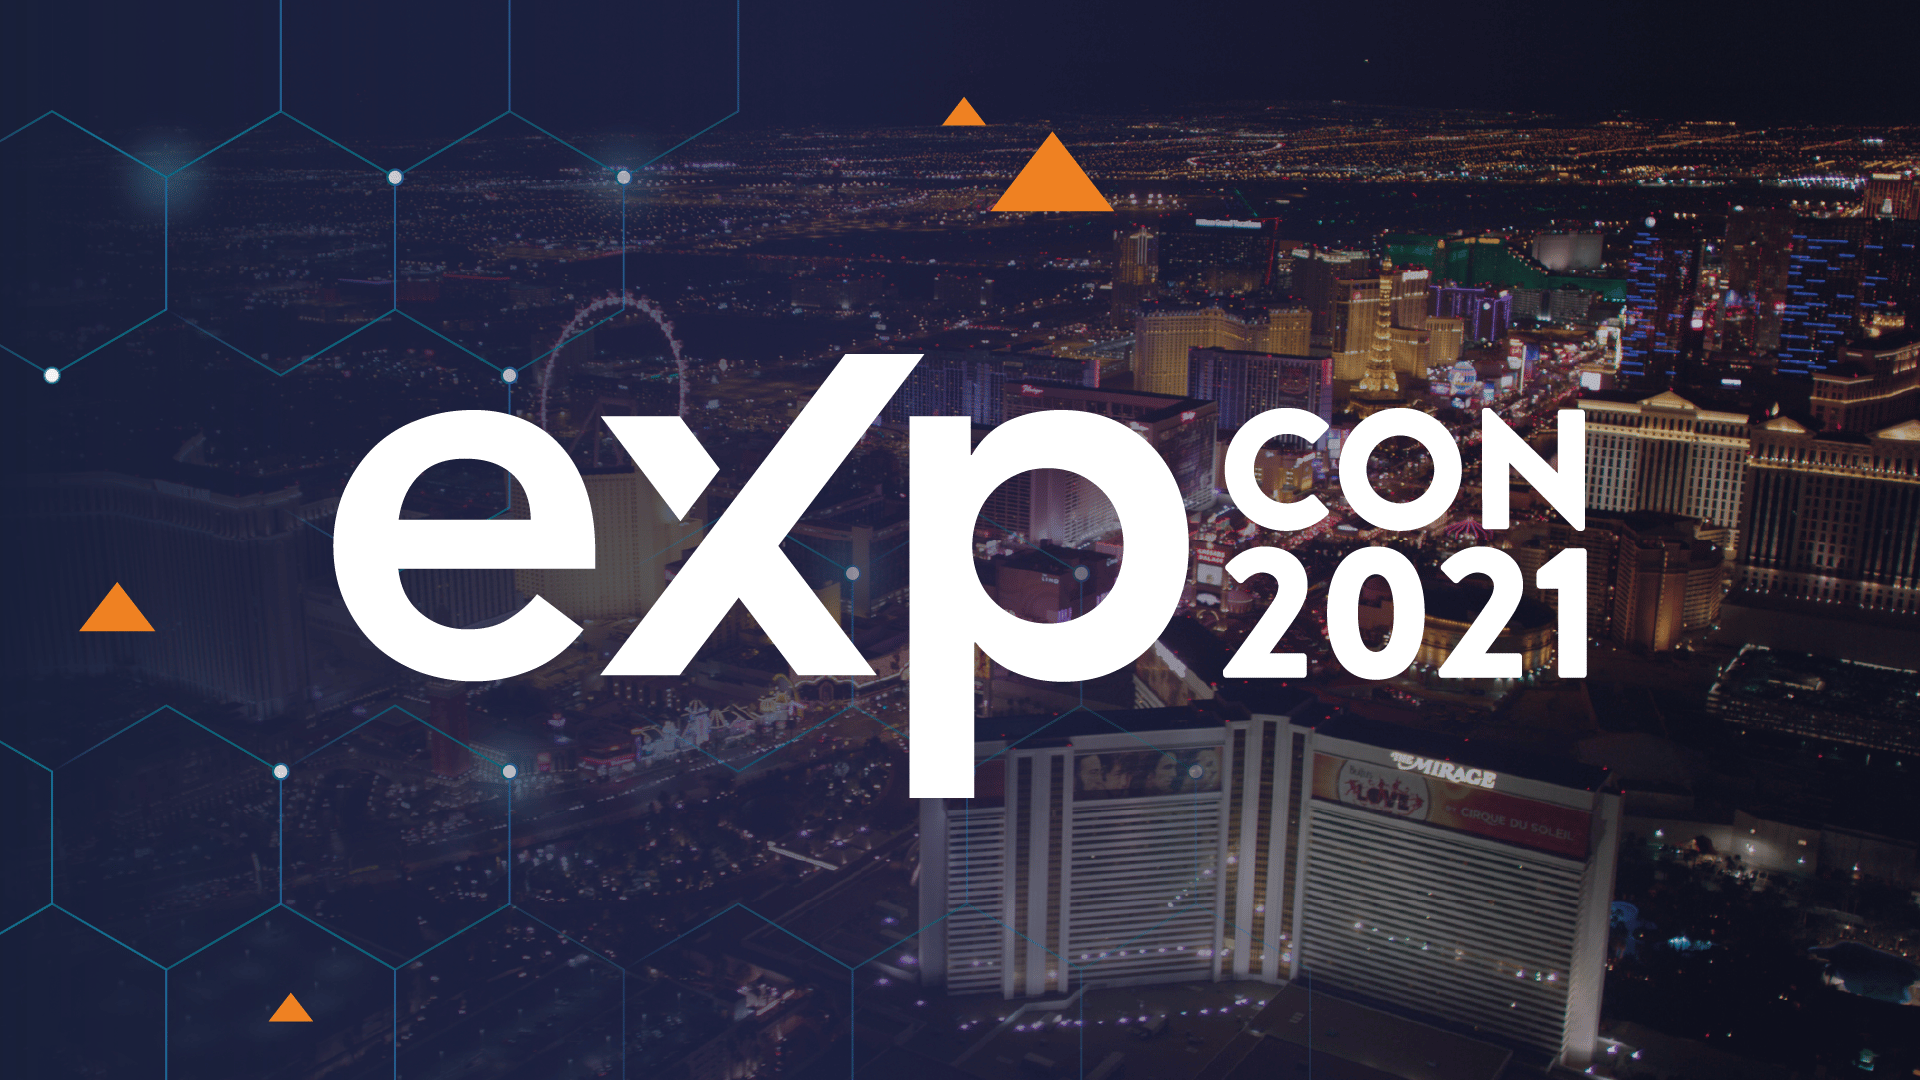 eXp Realty - Big News: #EXPCON2021 will be held November 9-11, 2021 in Las  Vegas! Save the date by pre-registering - hotel info, registration & event  updates will be emailed straight to